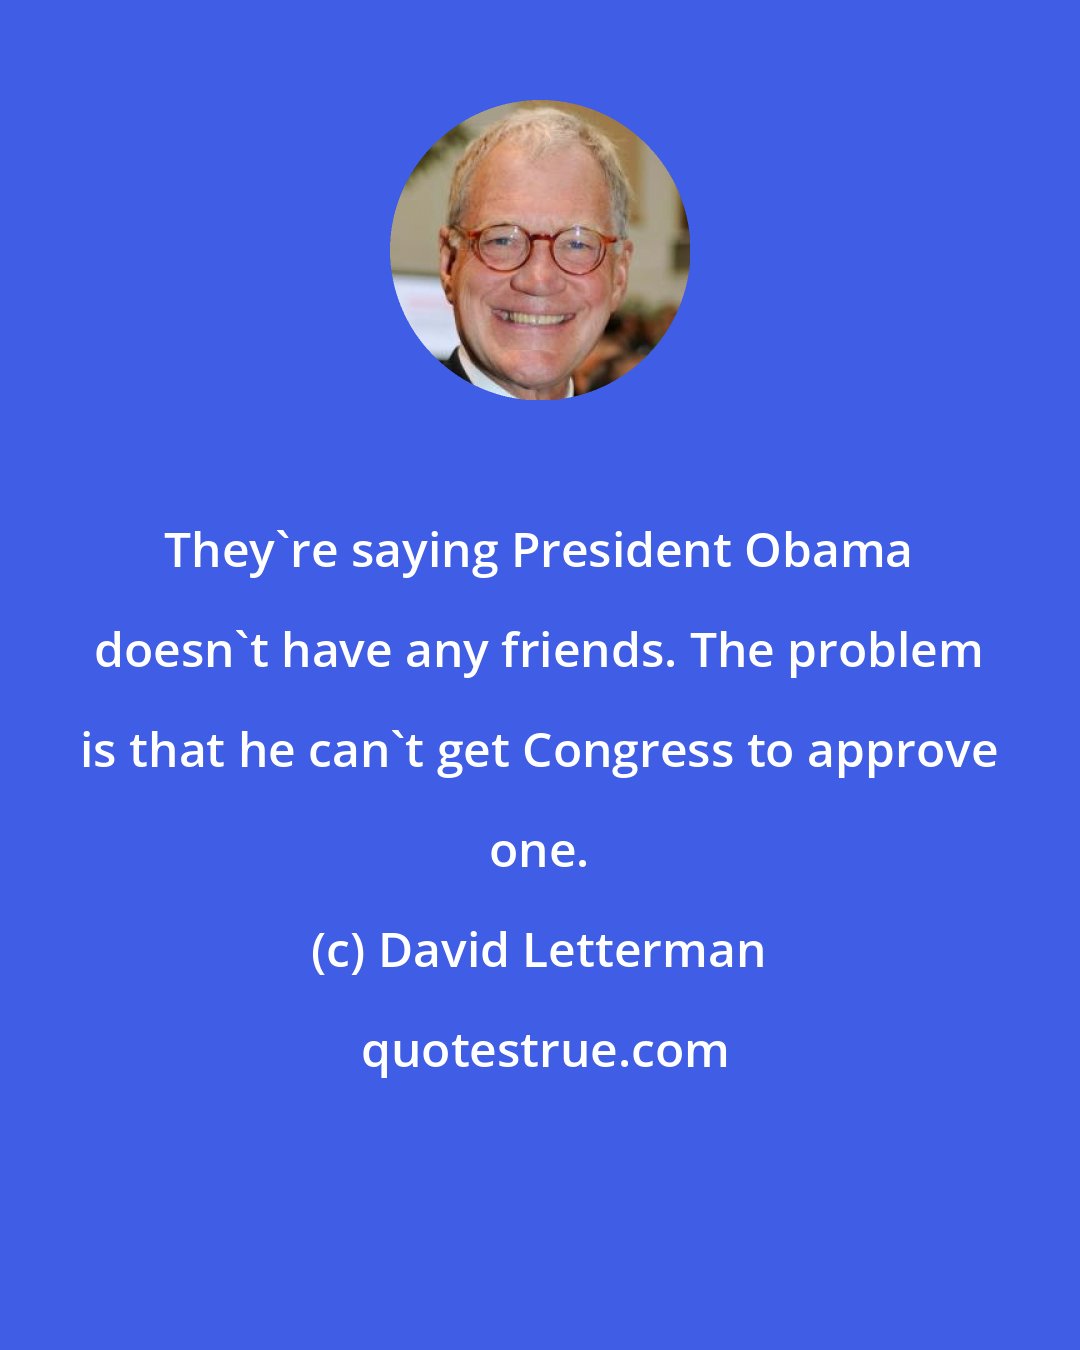 David Letterman: They're saying President Obama doesn't have any friends. The problem is that he can't get Congress to approve one.